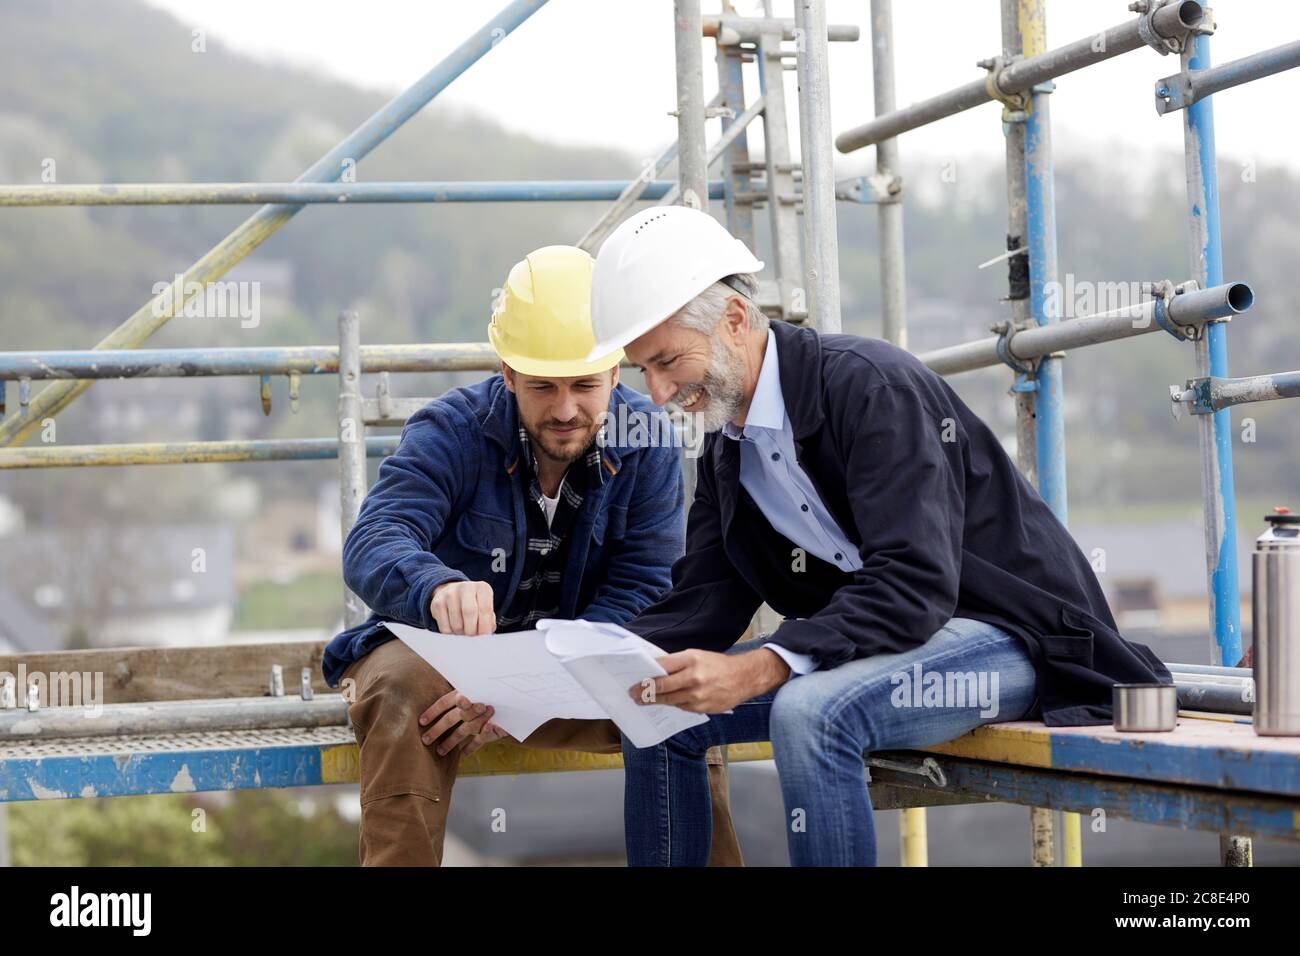 Architect and worker discussing building plan on scaffolding on a construction site Stock Photo